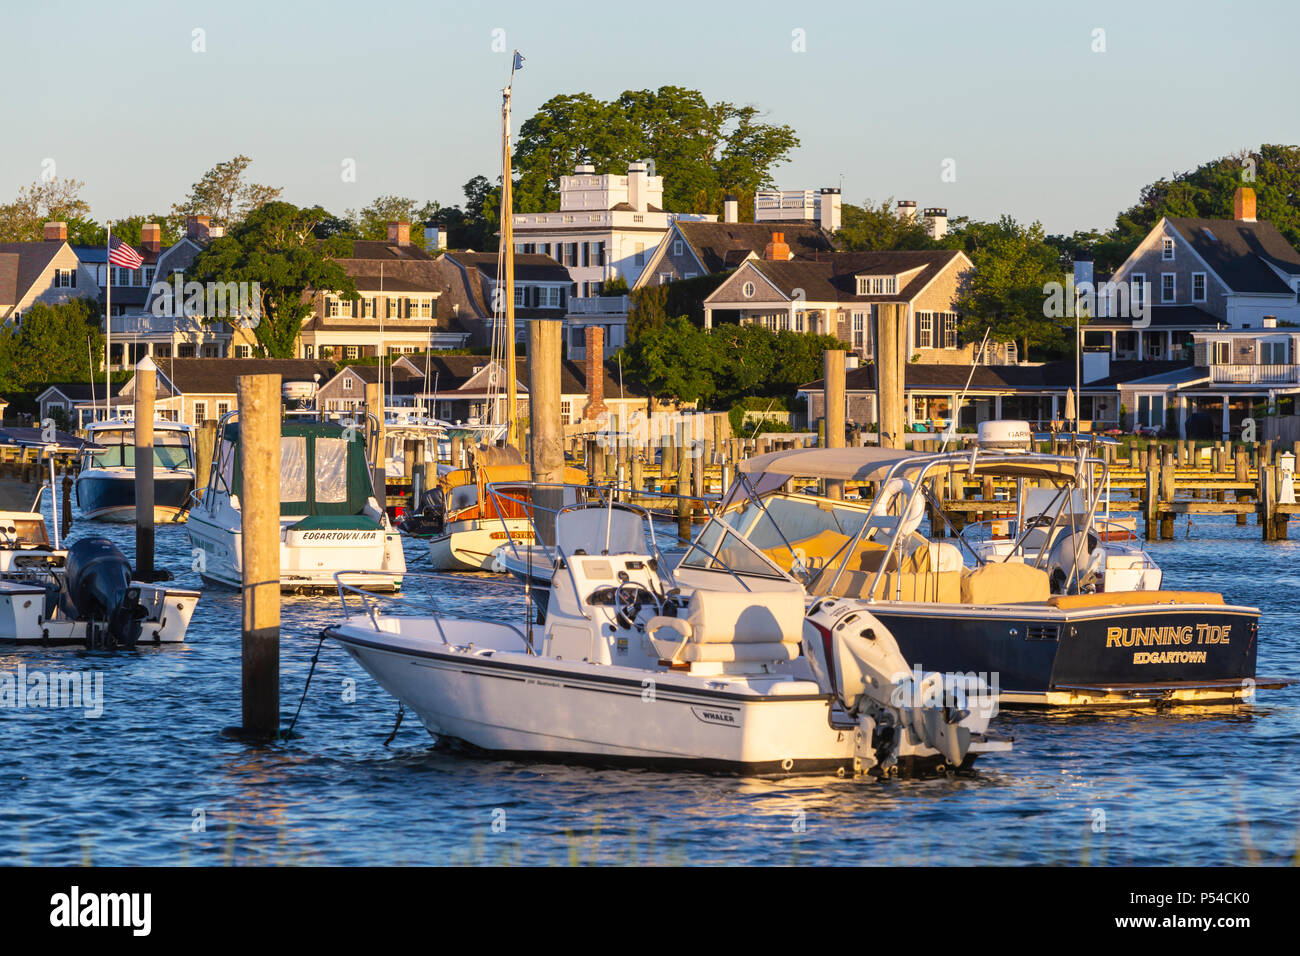 Boats moored and docked in the harbor, overlooked by stately sea captains' homes in Edgartown, Massachusetts on Martha's Vineyard. Stock Photo